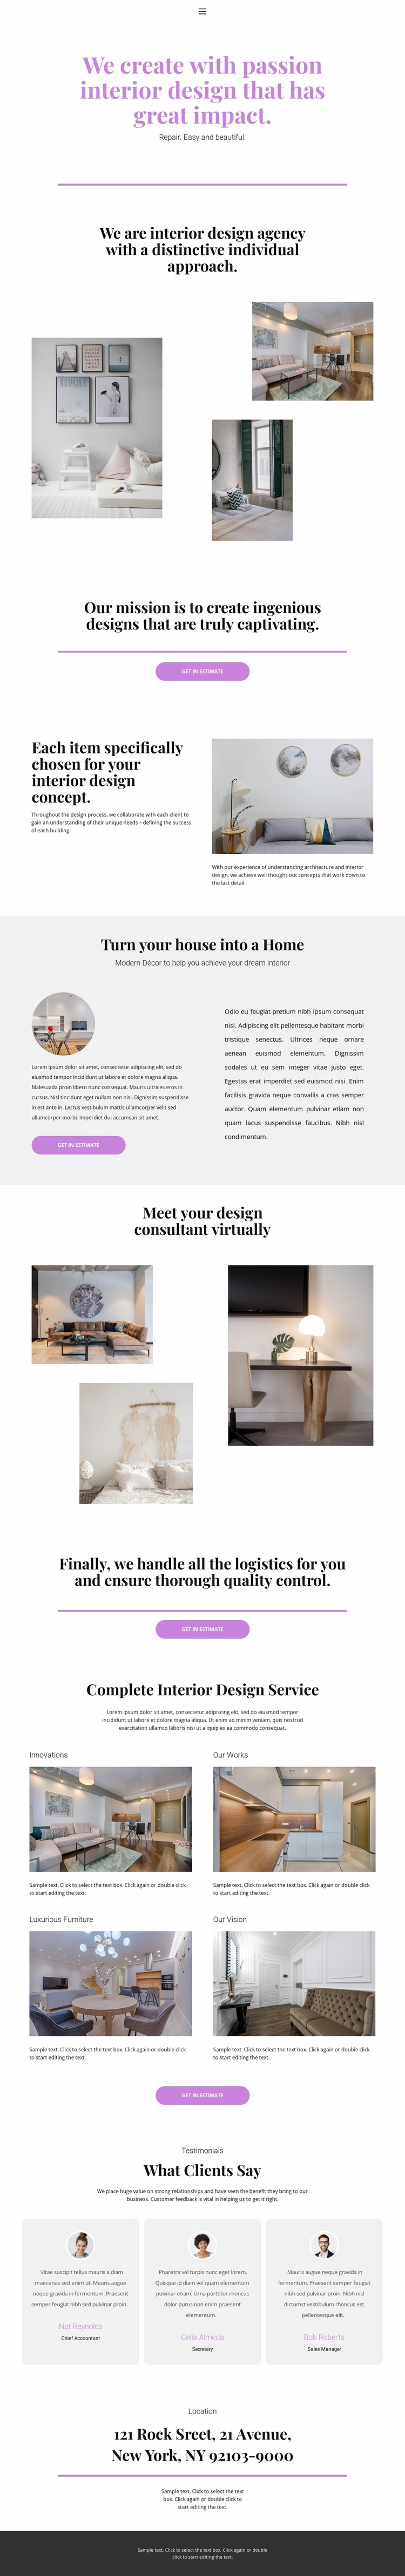 Choice of design for the house Website Design